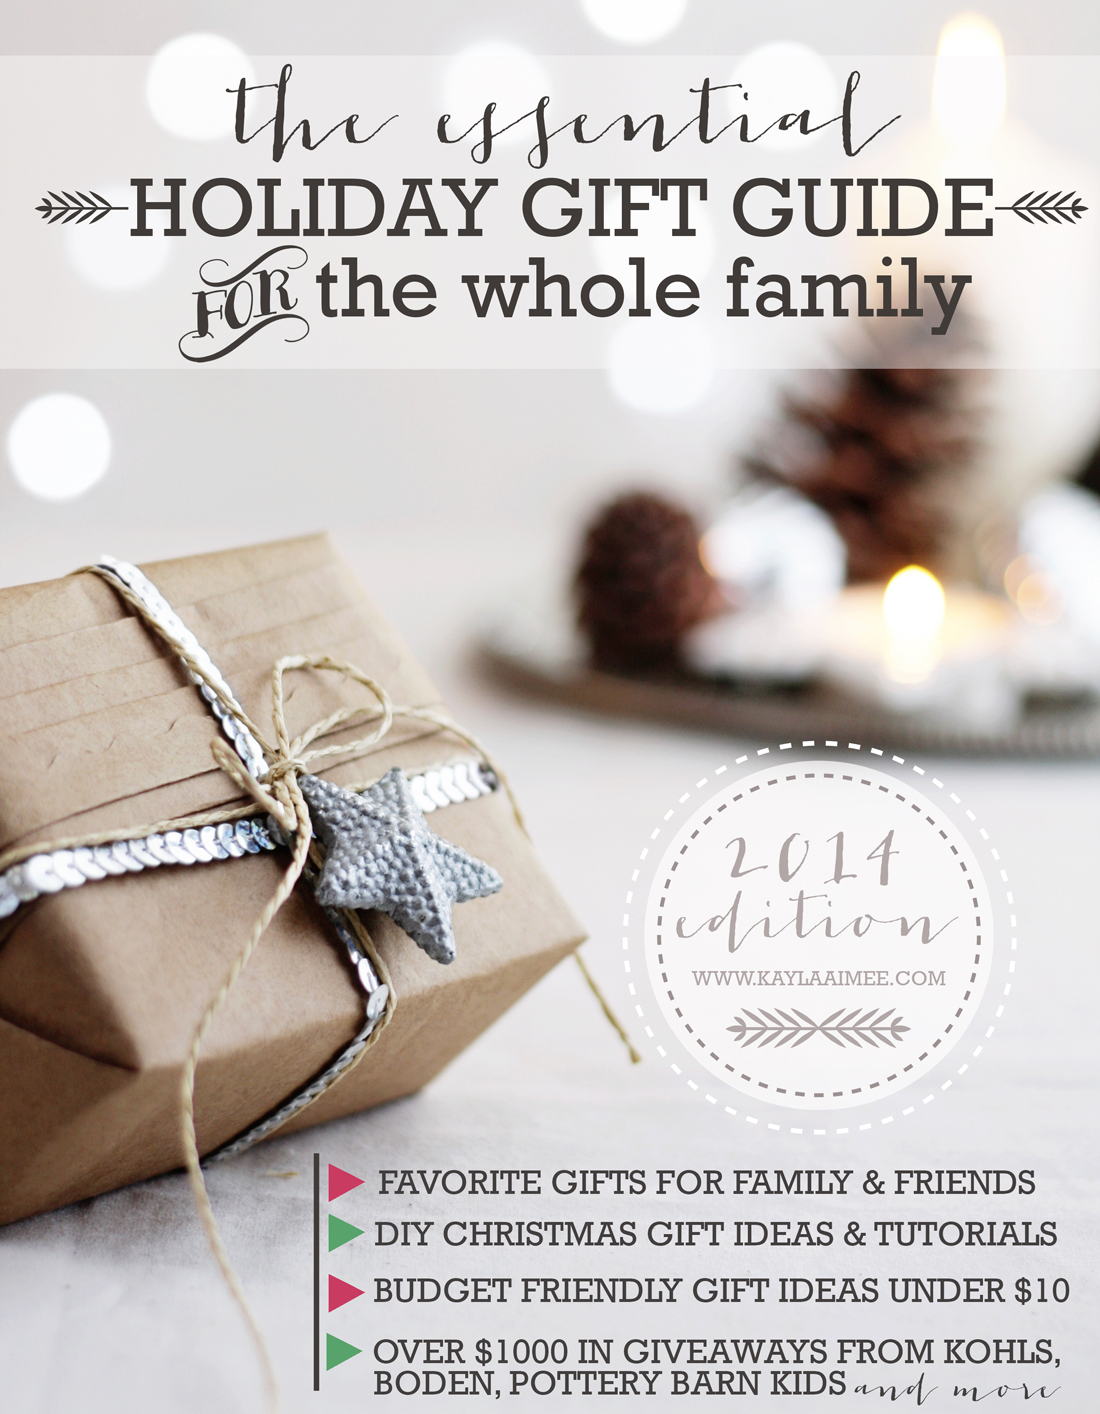 This Holiday Gift Guide has some cute and creative ideas for the whole family plus giveaways from Pottery Barn Kids, Land of Nod, Boden and more! Love it!